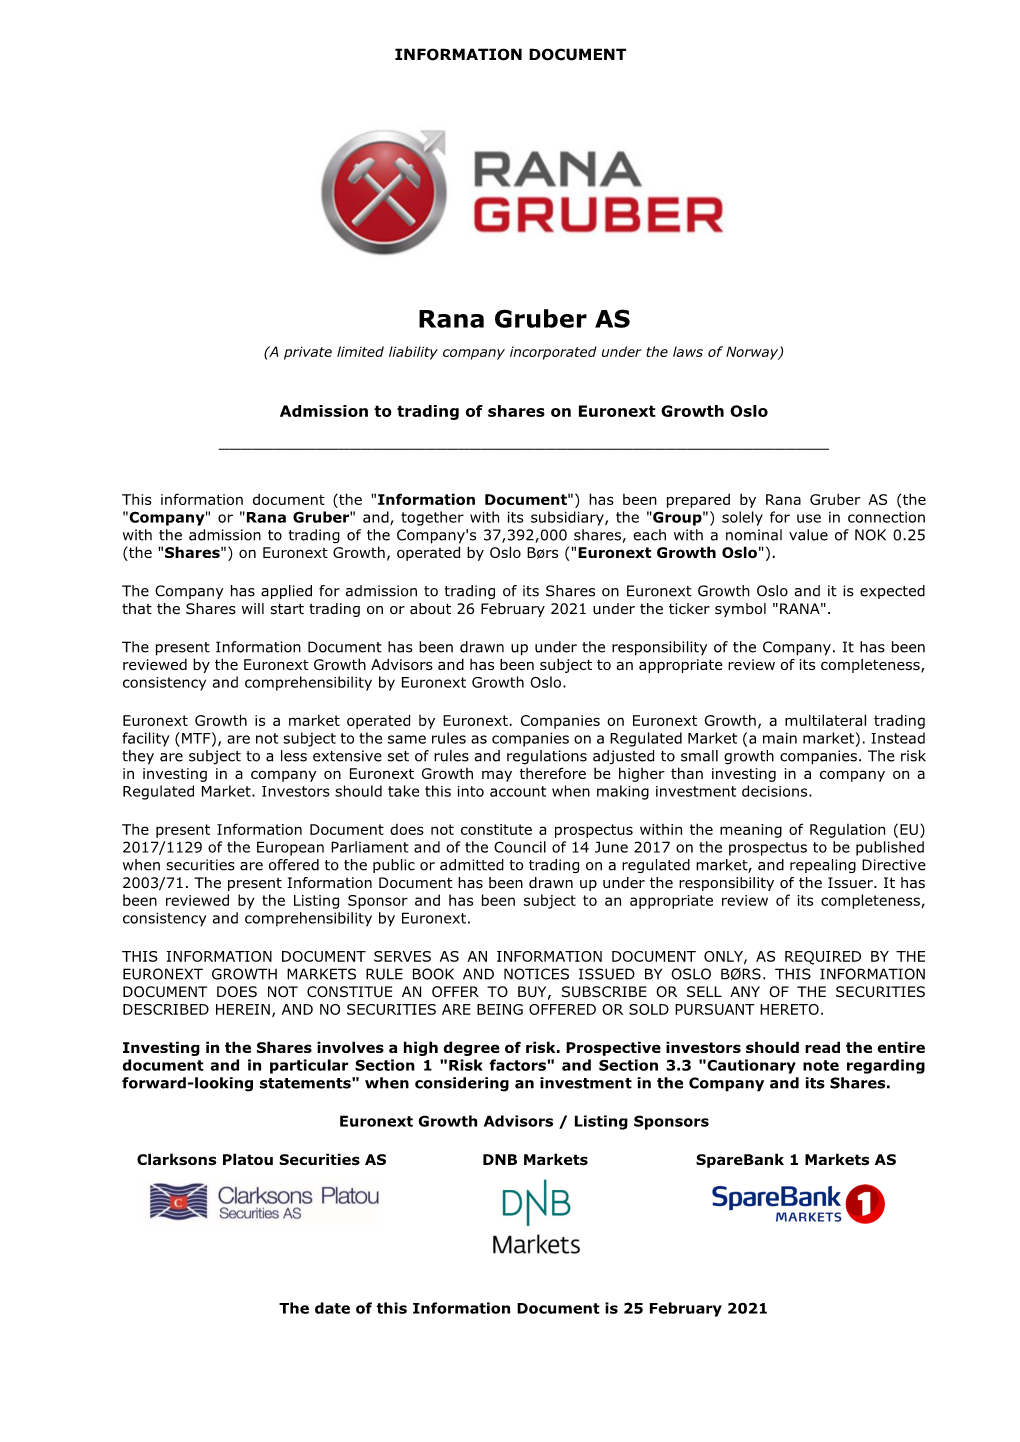 Rana Gruber AS (A Private Limited Liability Company Incorporated Under the Laws of Norway)